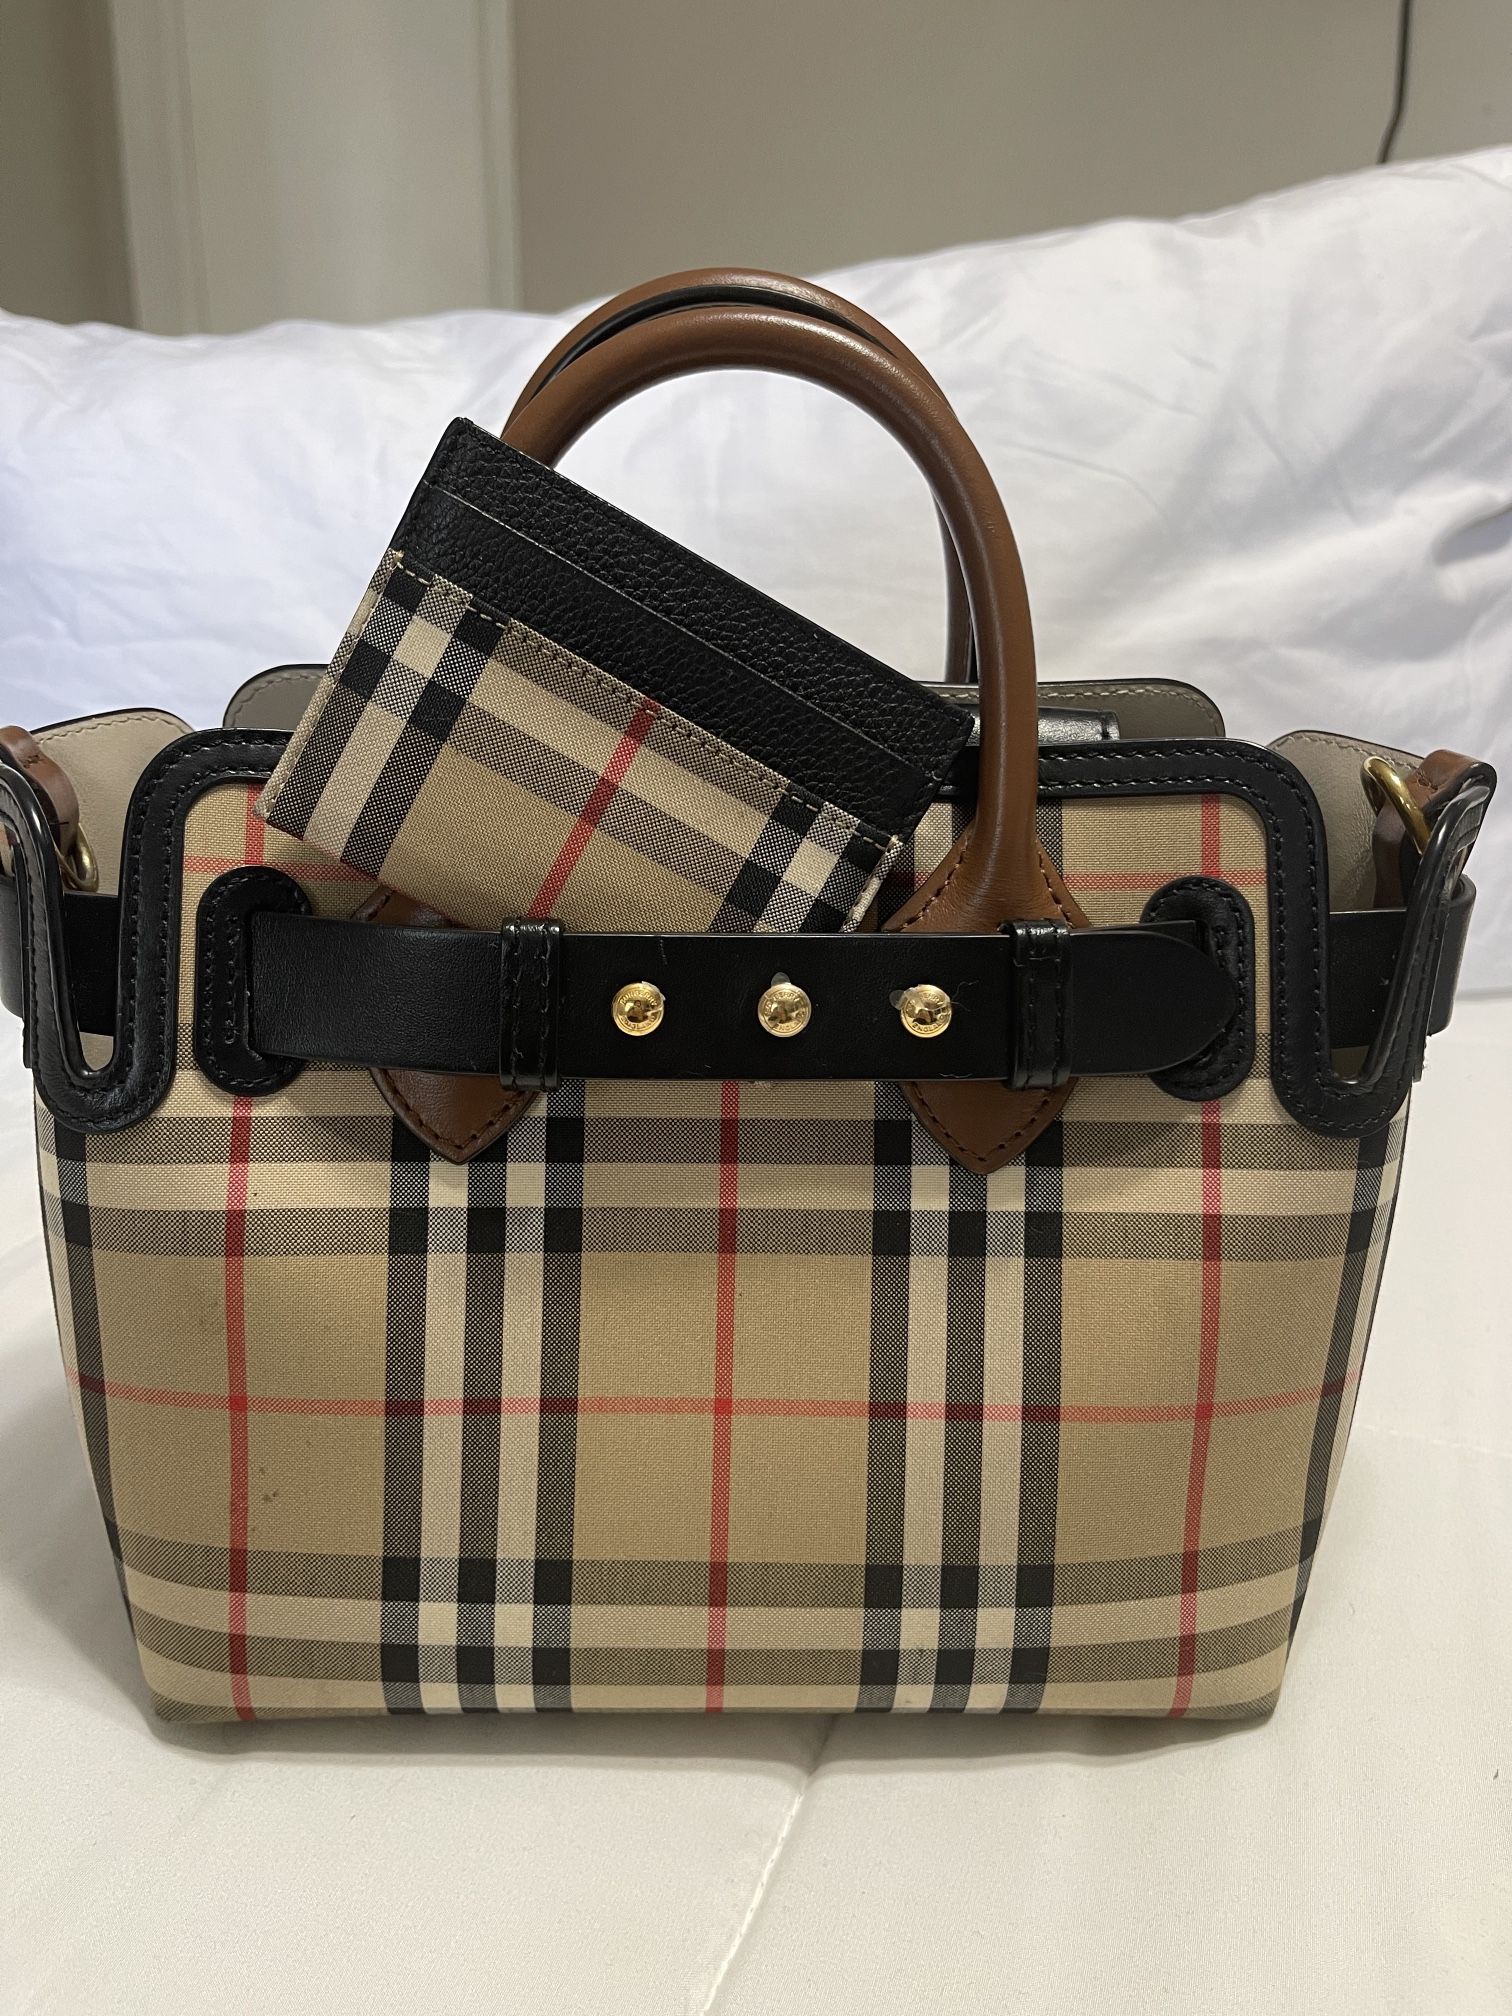 Burberry Purse And Wallet